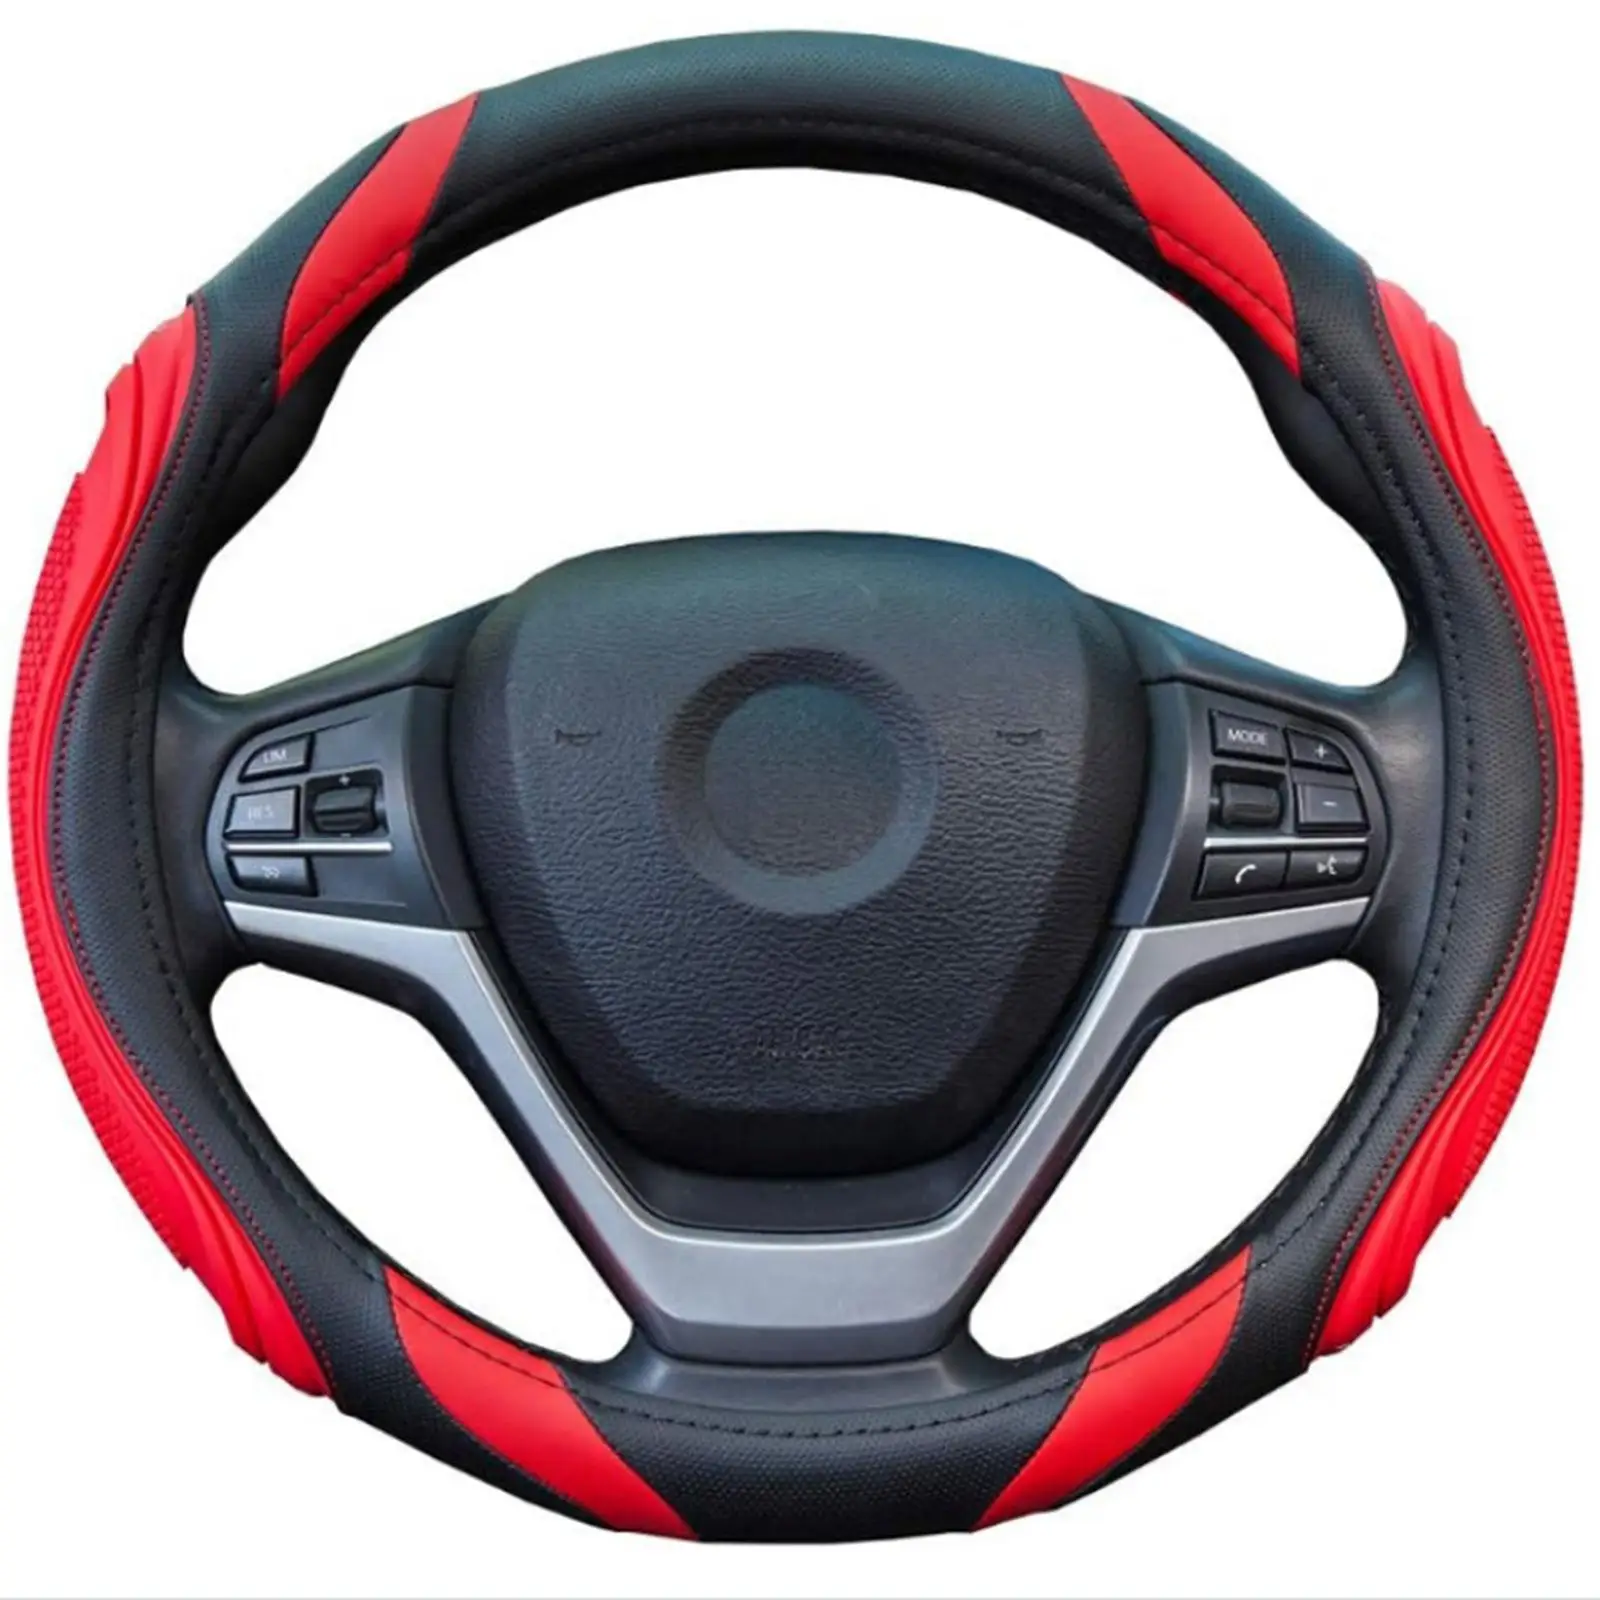 Steering Wheel Cover Protector Universal Good Performance Comfortable to Handle for Spring Summer Autumn and Winter AntiSlip